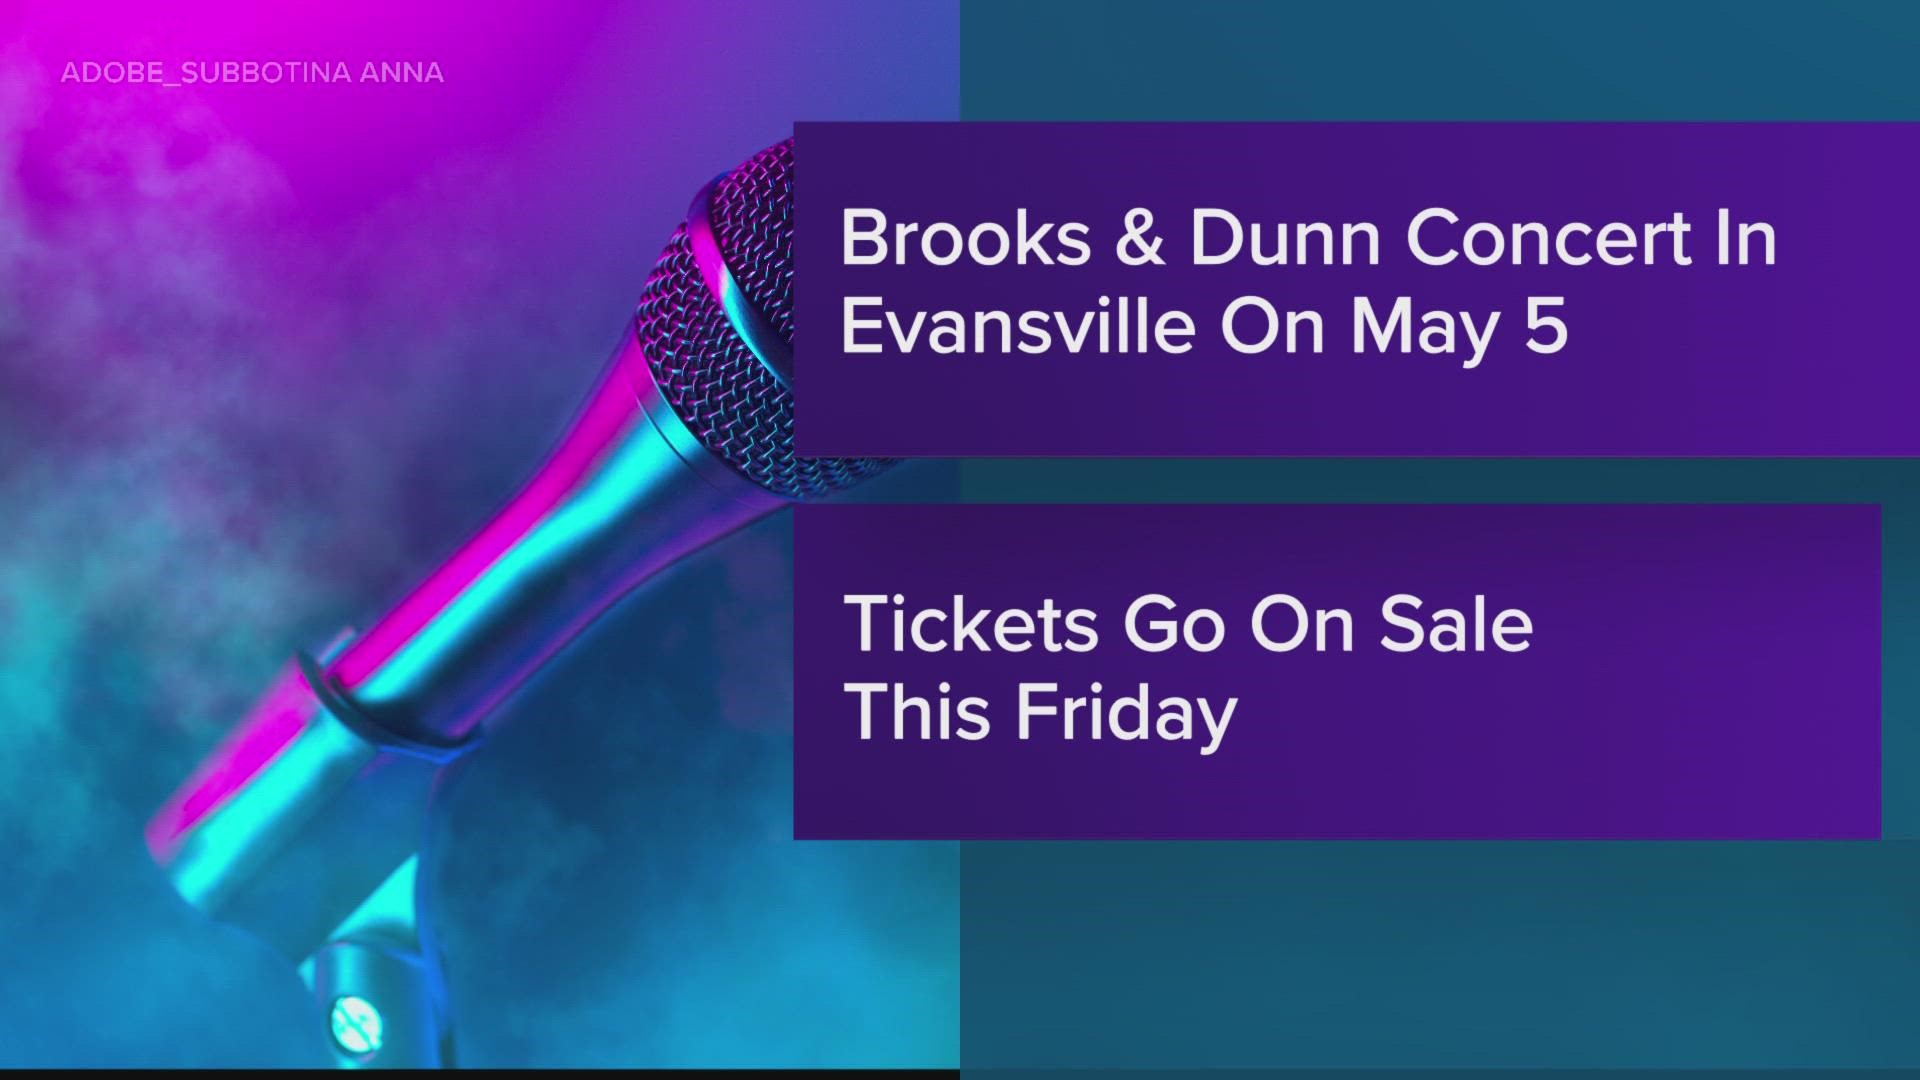 Tickets go on sale Friday for The Chicks Sunday, June 19 concert. Brooks & Dunn is coming to Evansville May 5.